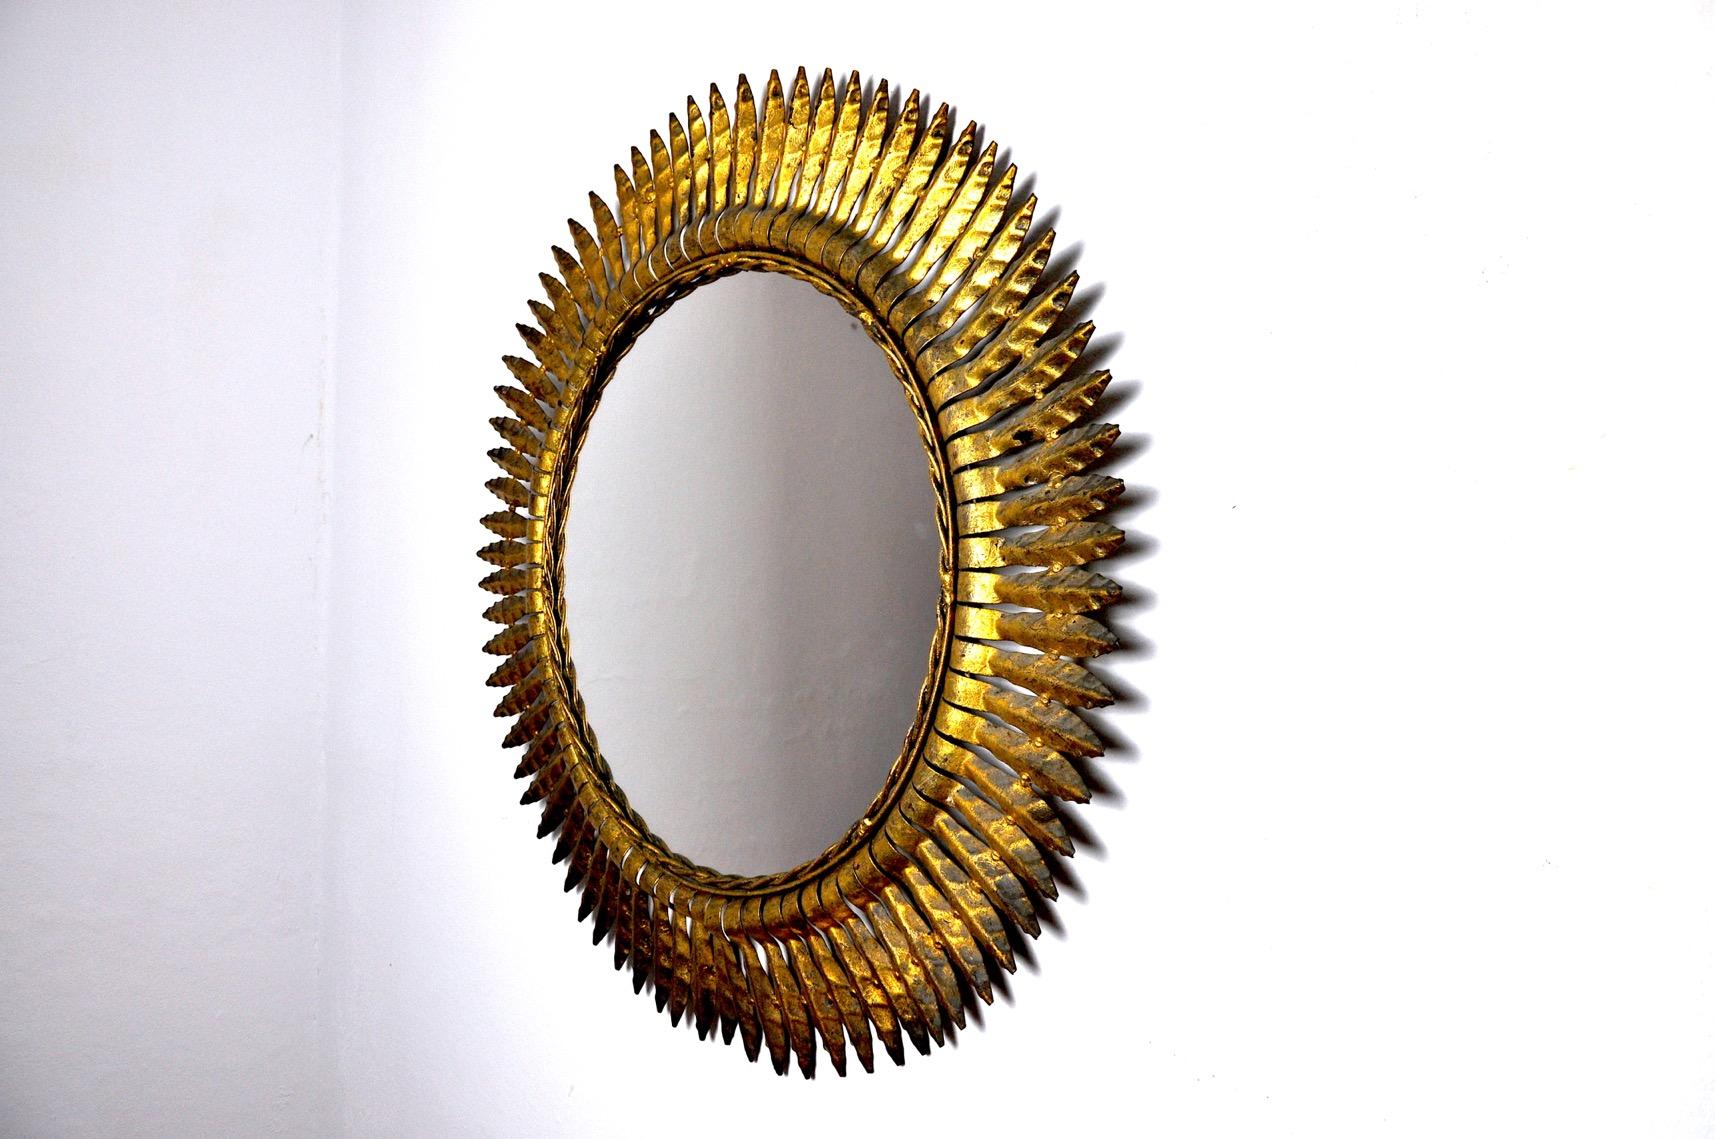 Large golden metal sun mirror from the 60s produced in Italy. Superb metal work, gold leaf finish. In perfect state of conservation. Unique objects that will decorate wonderfully and bring a real design touch to your interior. Ref: 732.

